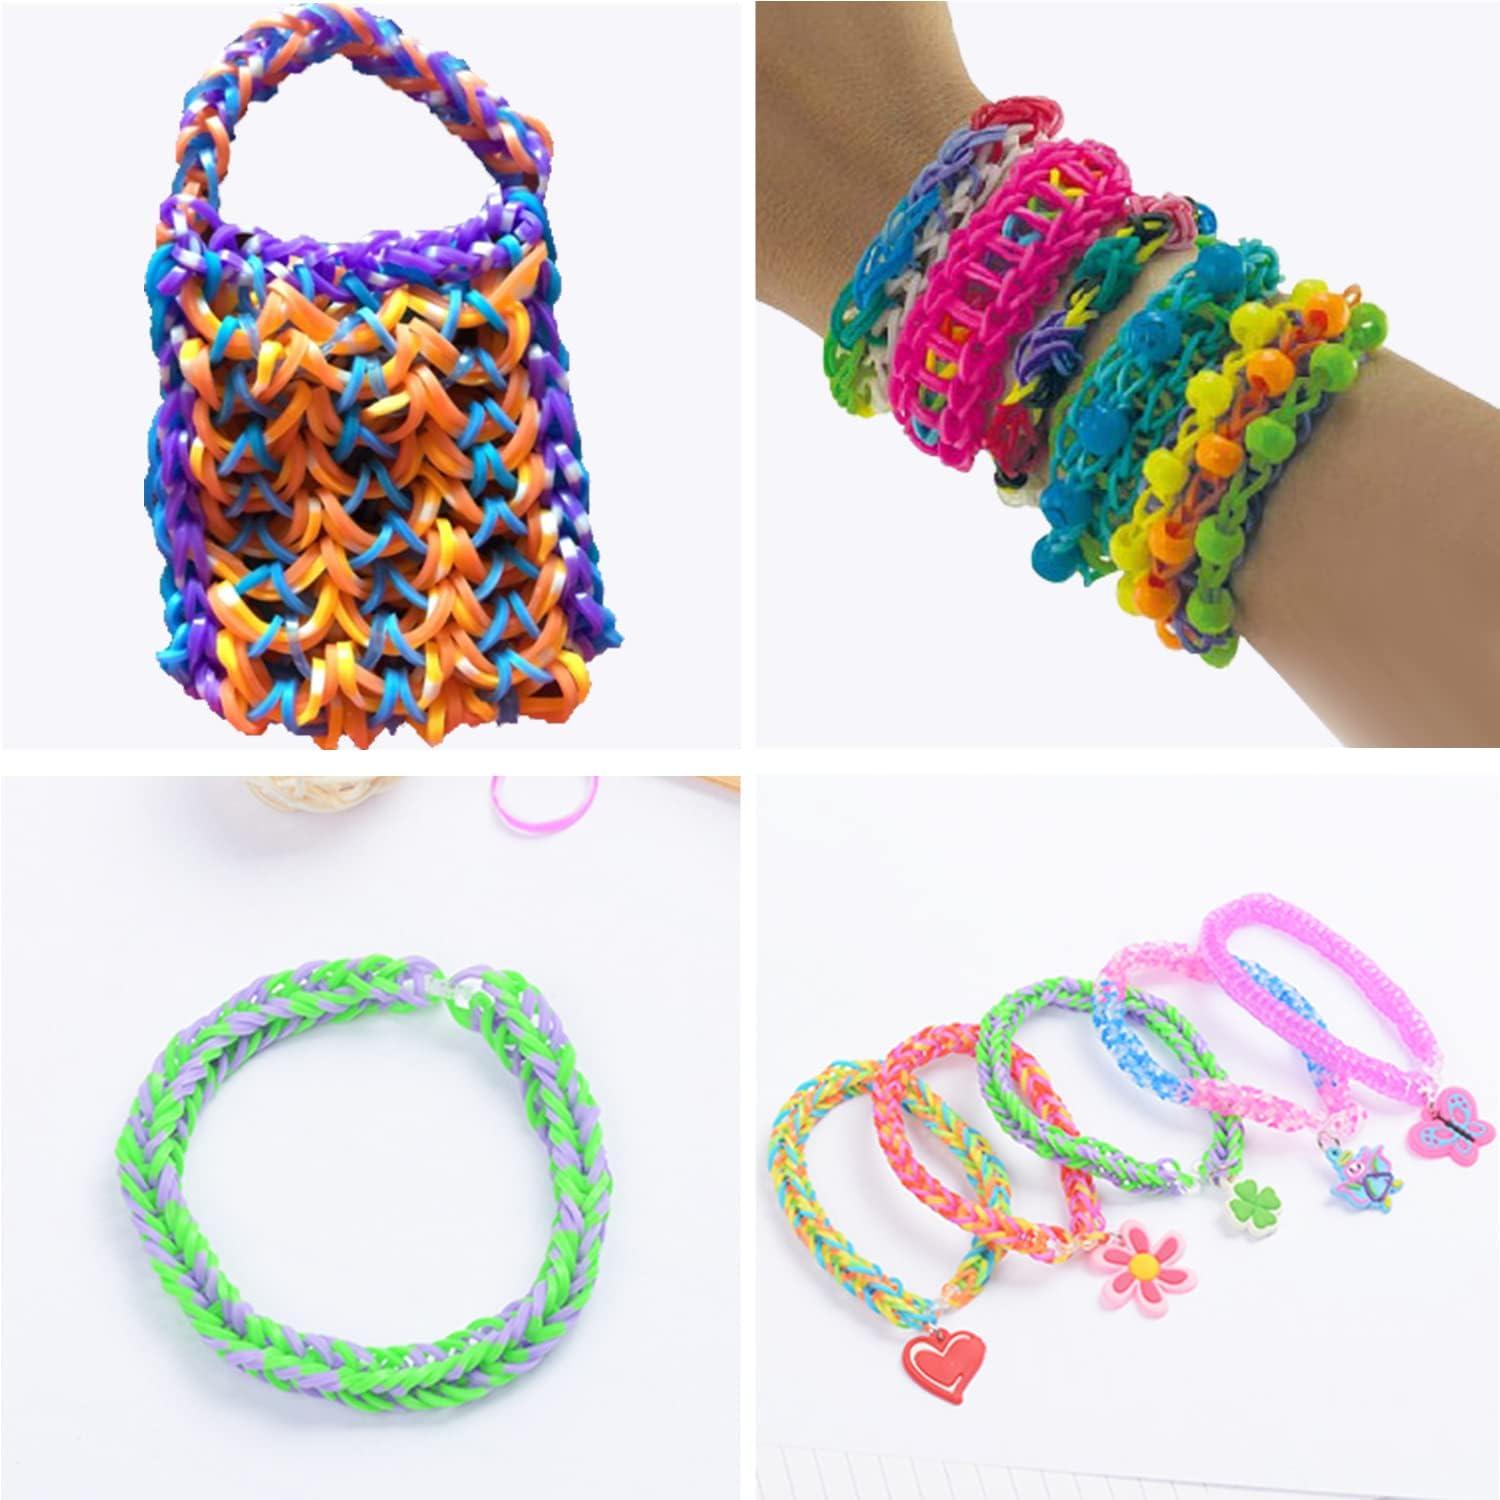 How to Make Loom Bands with Beads: 6 Steps (with Pictures)